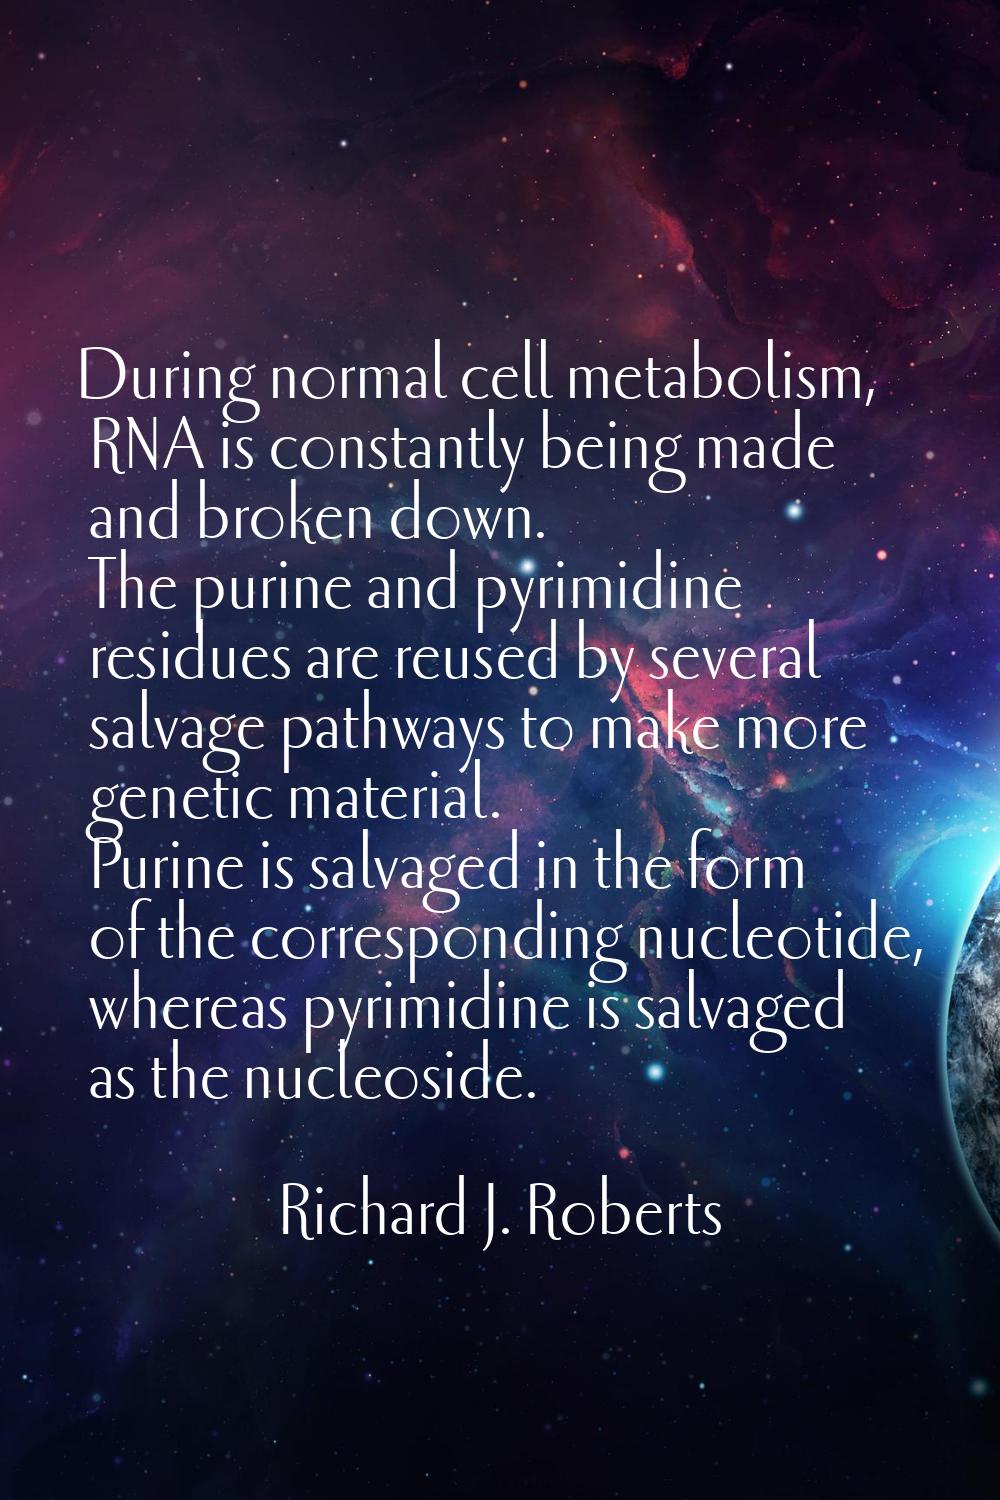 During normal cell metabolism, RNA is constantly being made and broken down. The purine and pyrimid